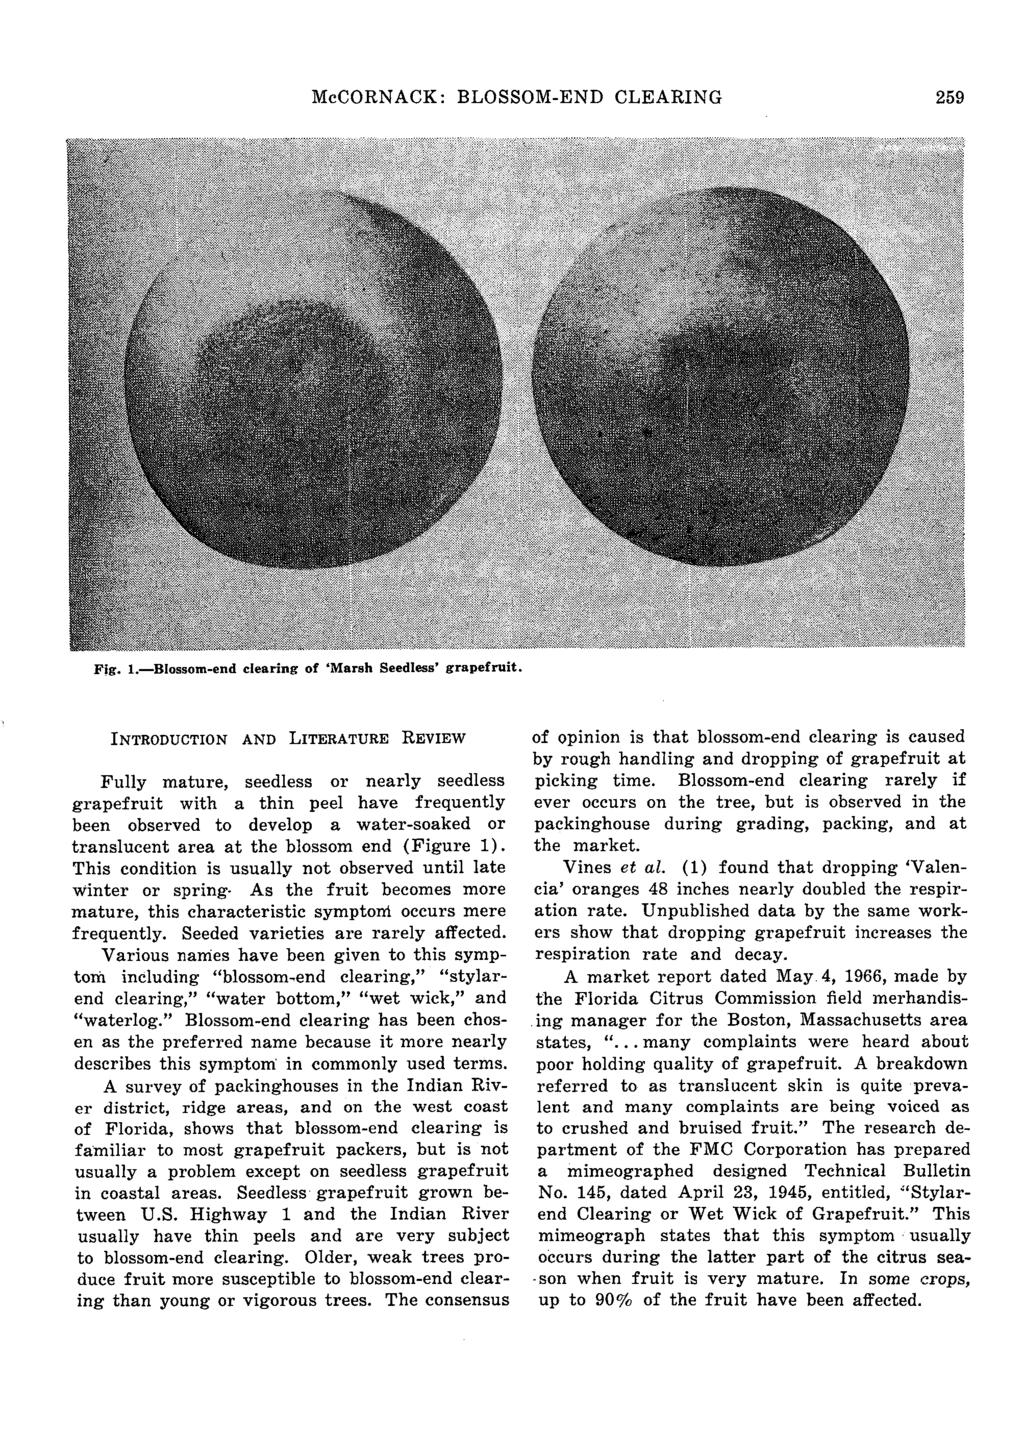 McCORNACK: BLOSSOM-END CLEARING 259 Fig. 1. Blossom-end clearing of 'Marsh Seedless' grapefruit.